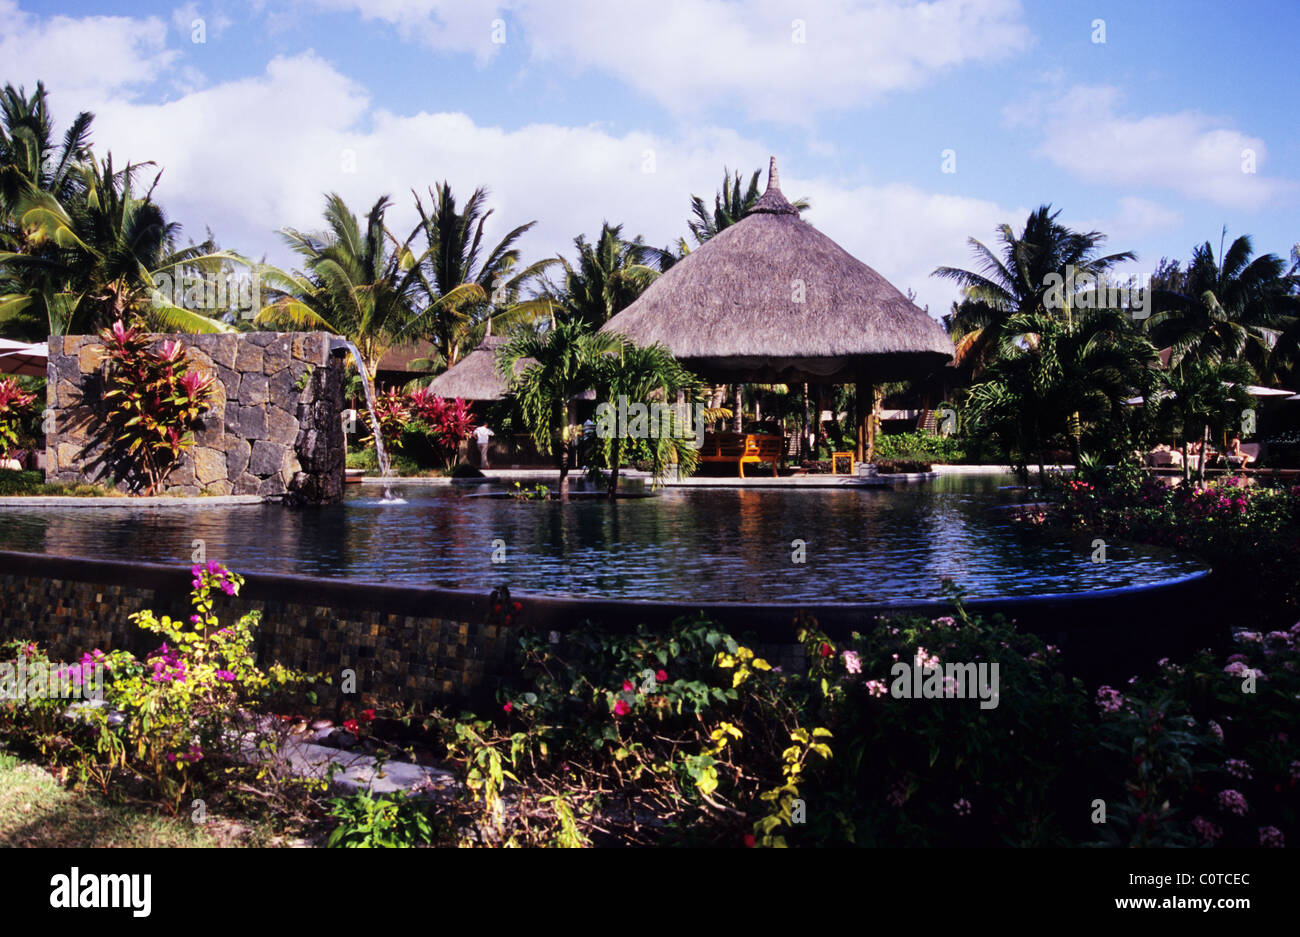 Les Pavillons Hotel. Le Morne Peninsula. Mauritius. Pool area, surrounded by lush tropical gardens. Stock Photo